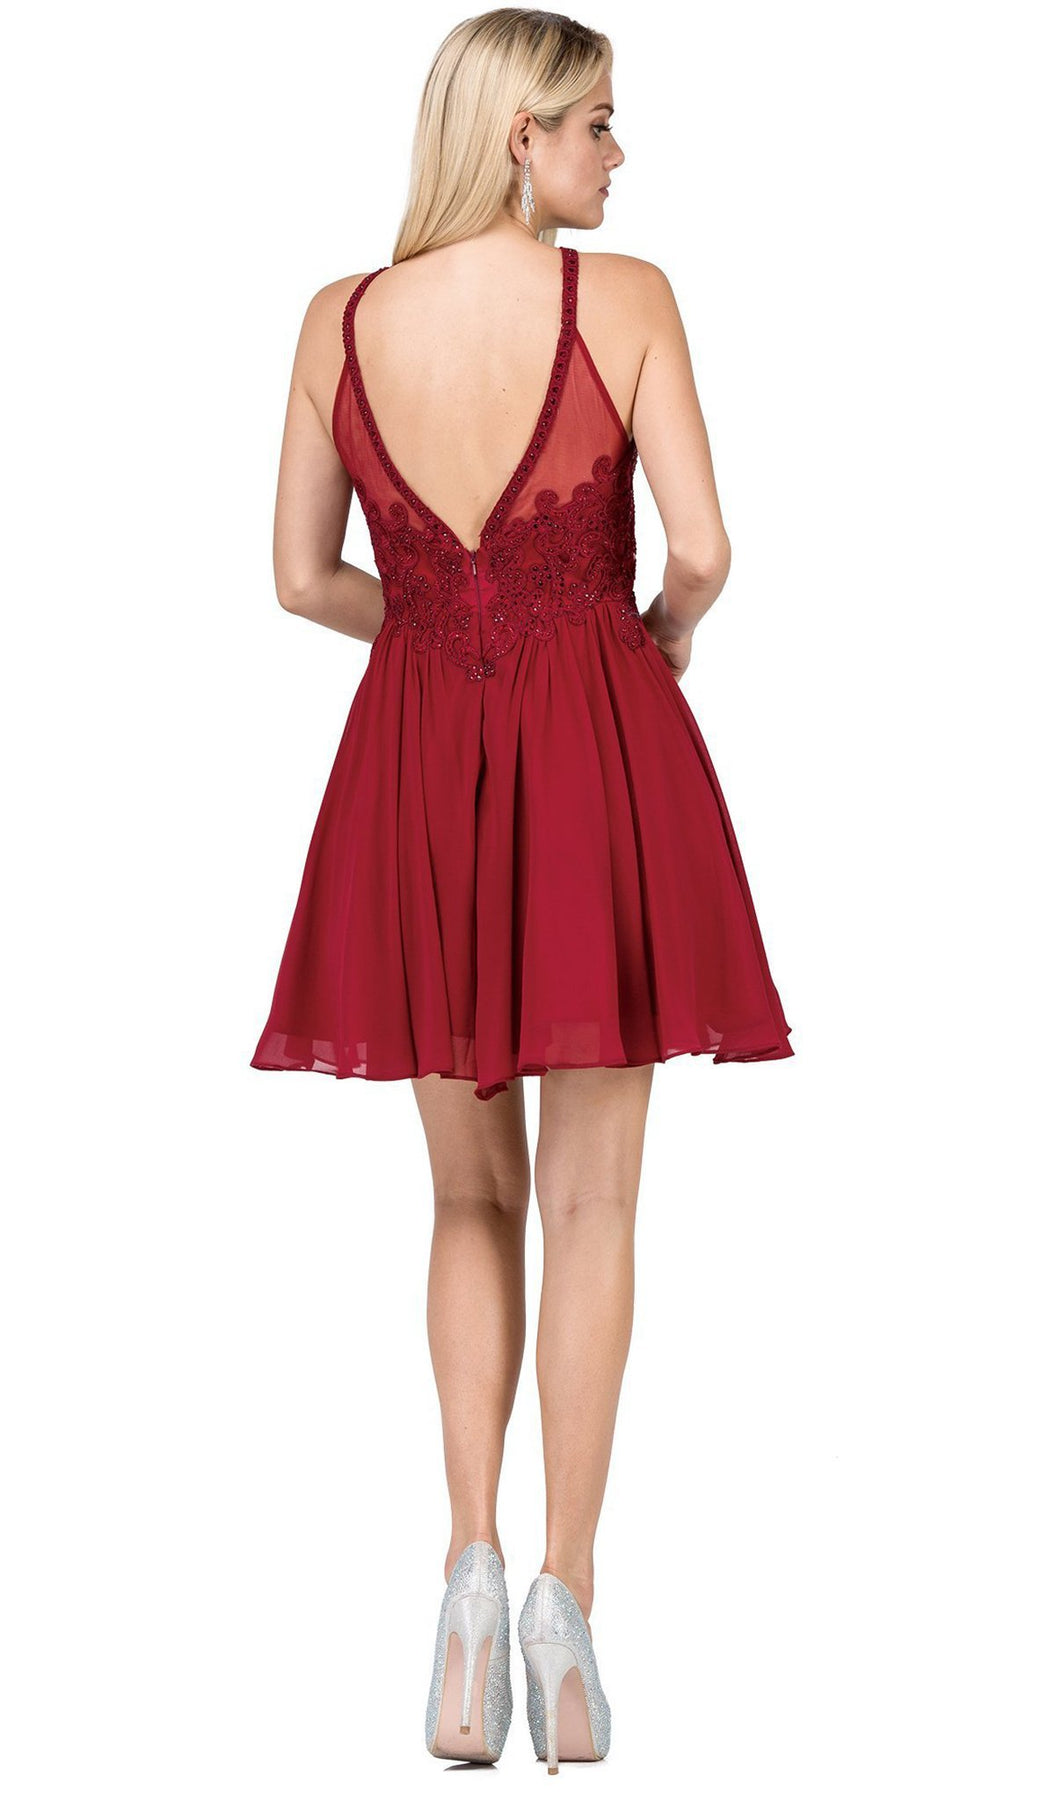 Dancing Queen - 3043 Beaded Lace Halter Homecoming Dress in Red